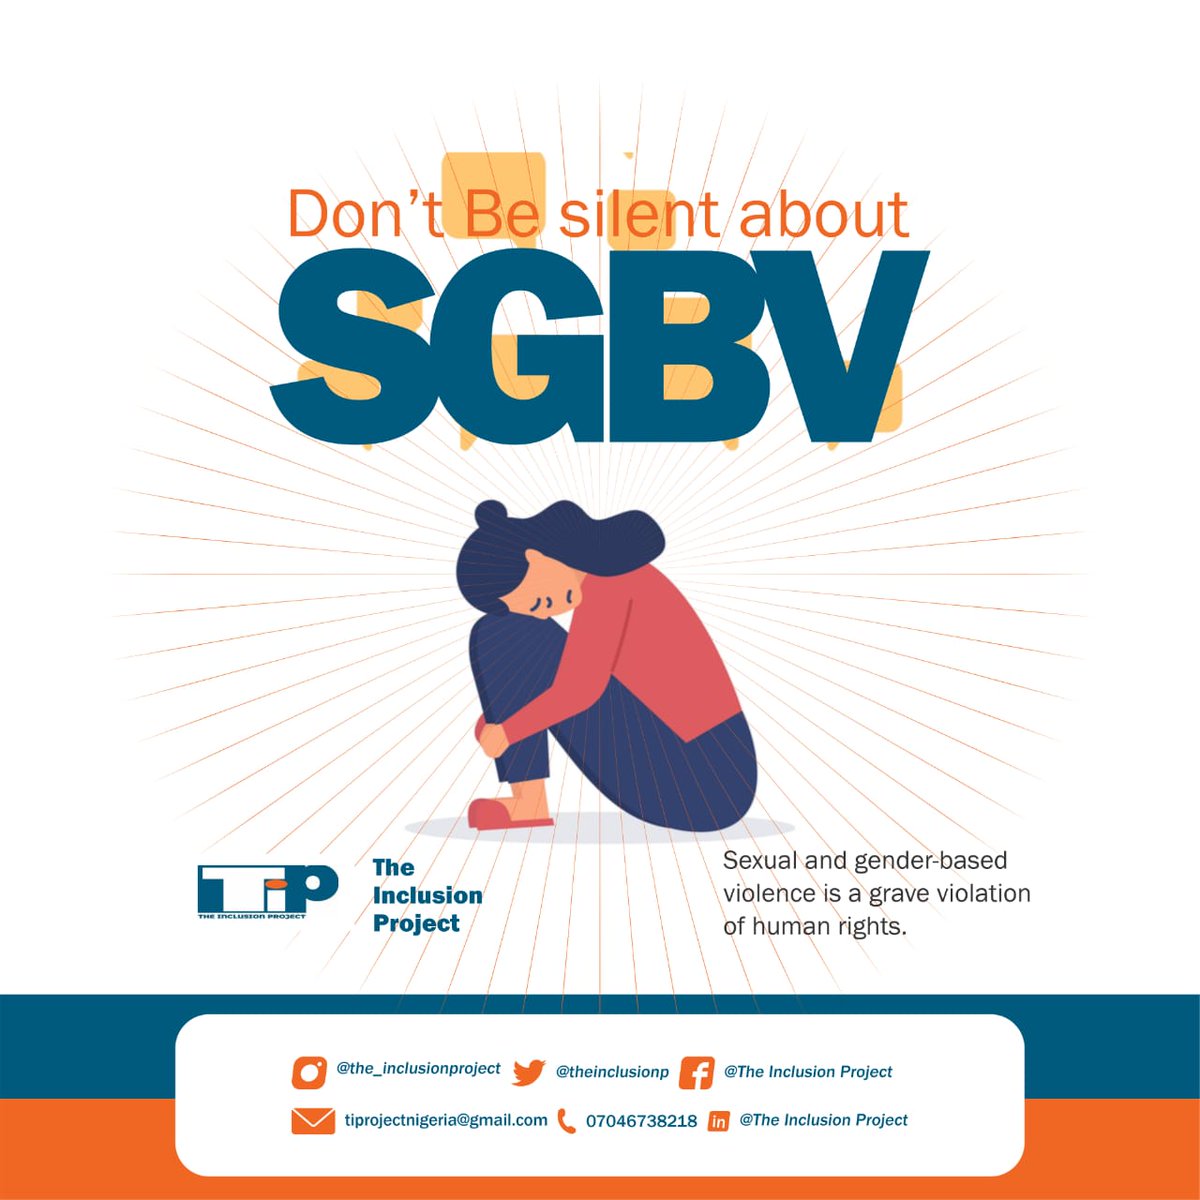 Raise your voice and break the silence on Sexual and Gender-Based Violence! Let's  stand together and say NO to abuse, support survivors, educate others, and create a world where safety, respect, and equality prevail. 

#EndSGBV 
#SpeakOut 
#believesurvivors